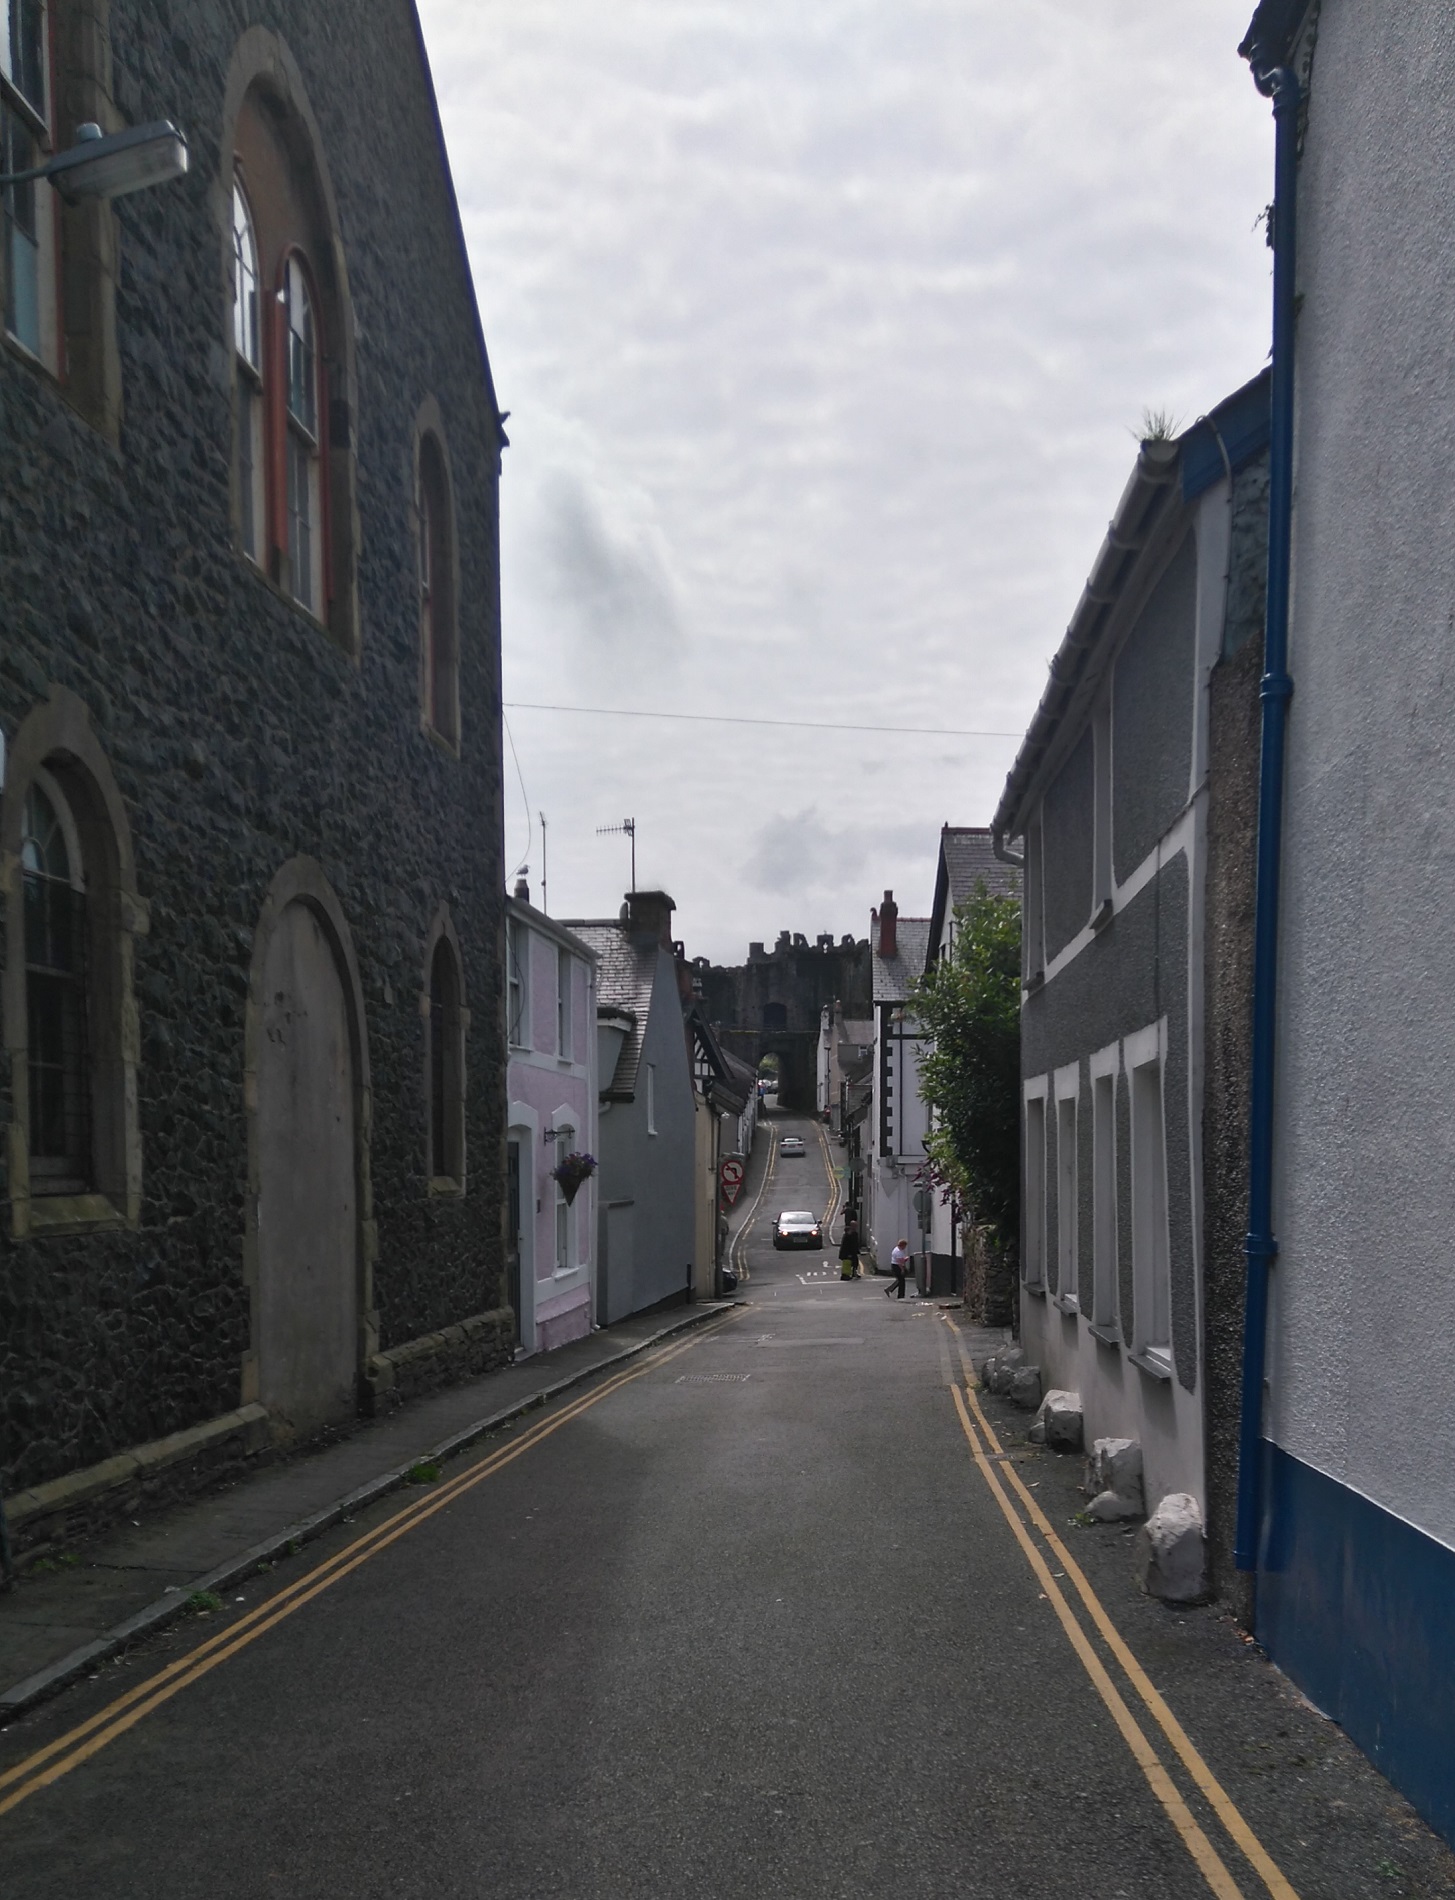 A narrow street in the historic Welsh town of Conwy. The ancient town walls are visible in the distance.